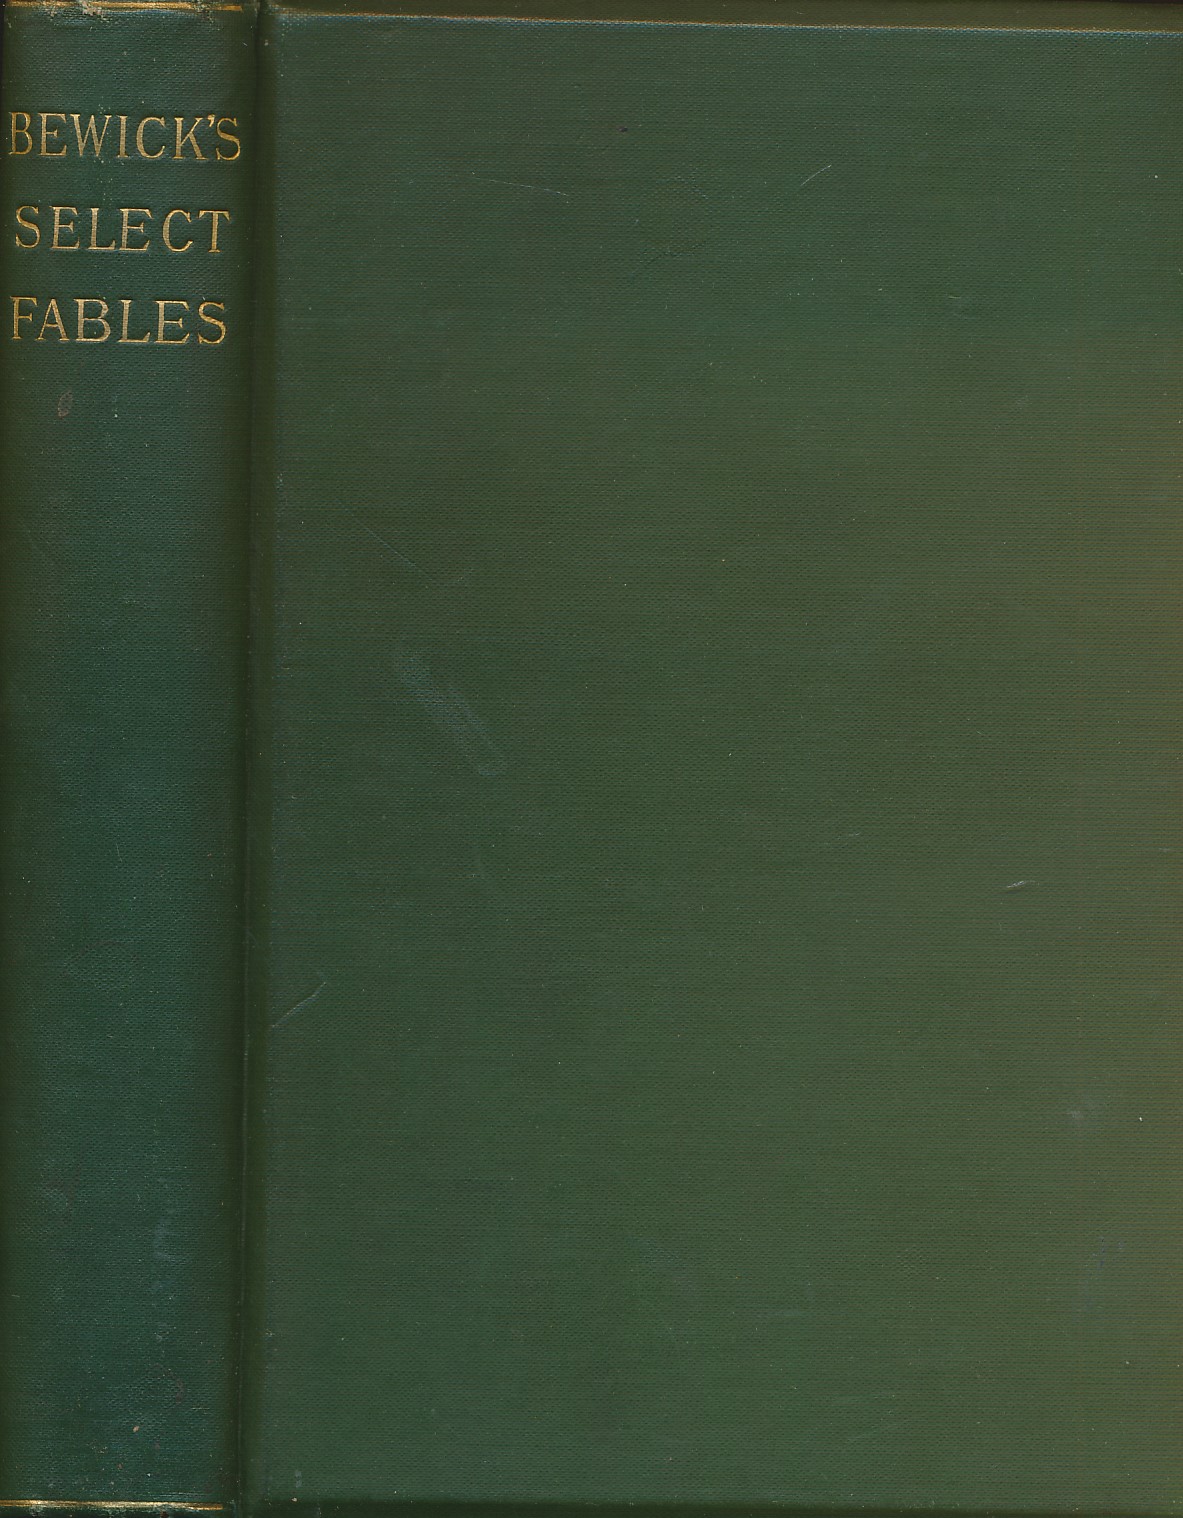 Bewick's Select Fables of sop and Others. In Three Parts. I. Fables Extracted form Dodsley's. II. Fables with Reflections in Prose and Verse. III. Fables in Verse.